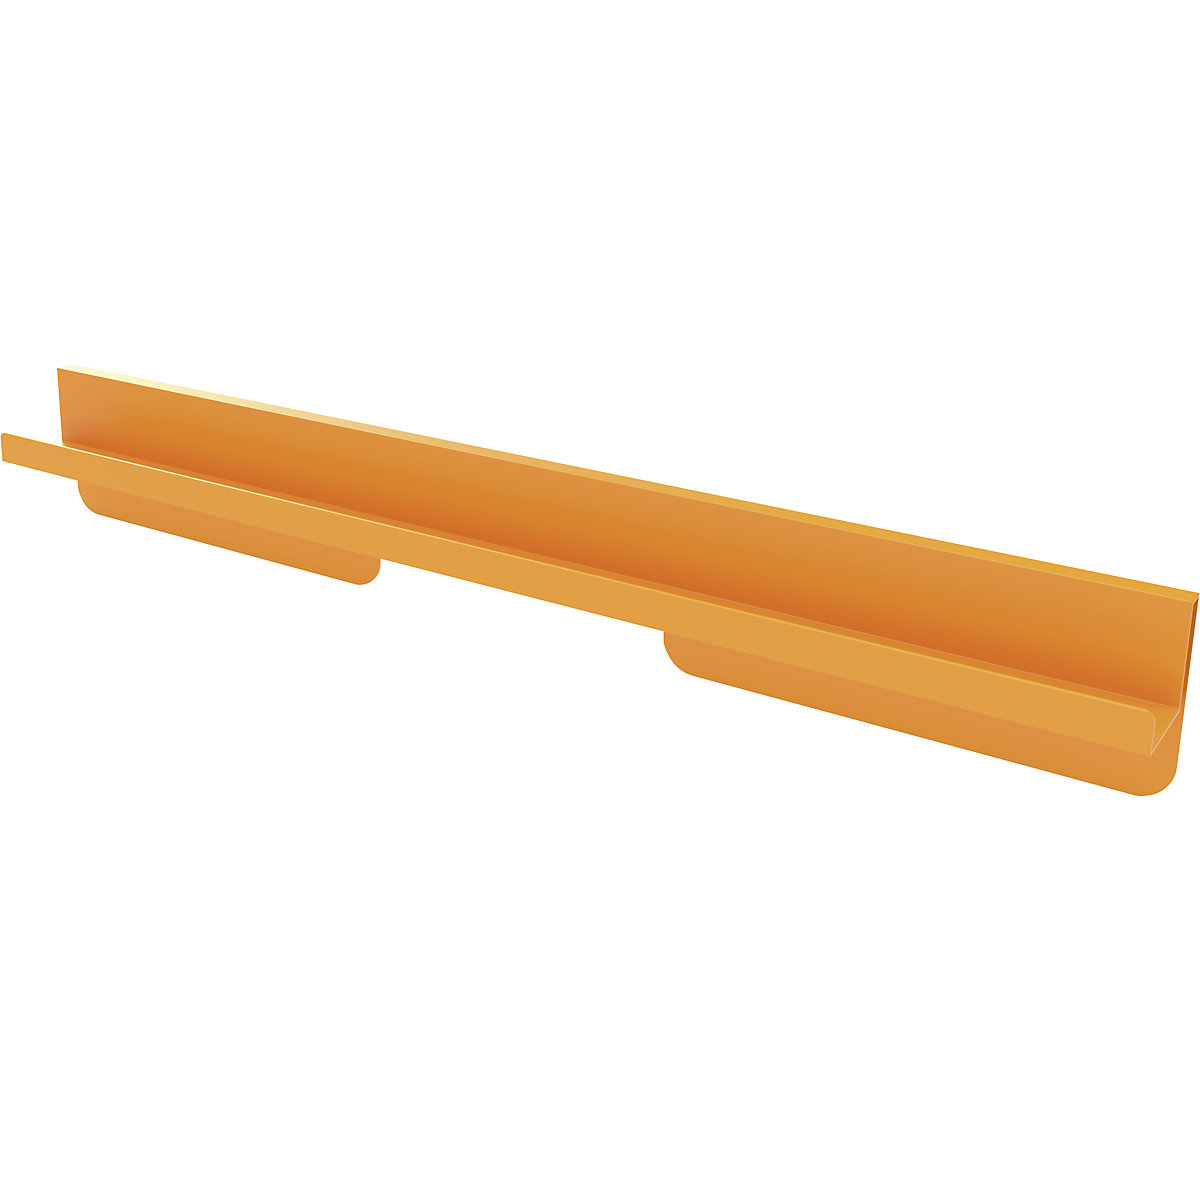 Pen tray for Infinity Wall – magnetoplan, LxDxH 780 x 75 x 110 mm, melon yellow-7